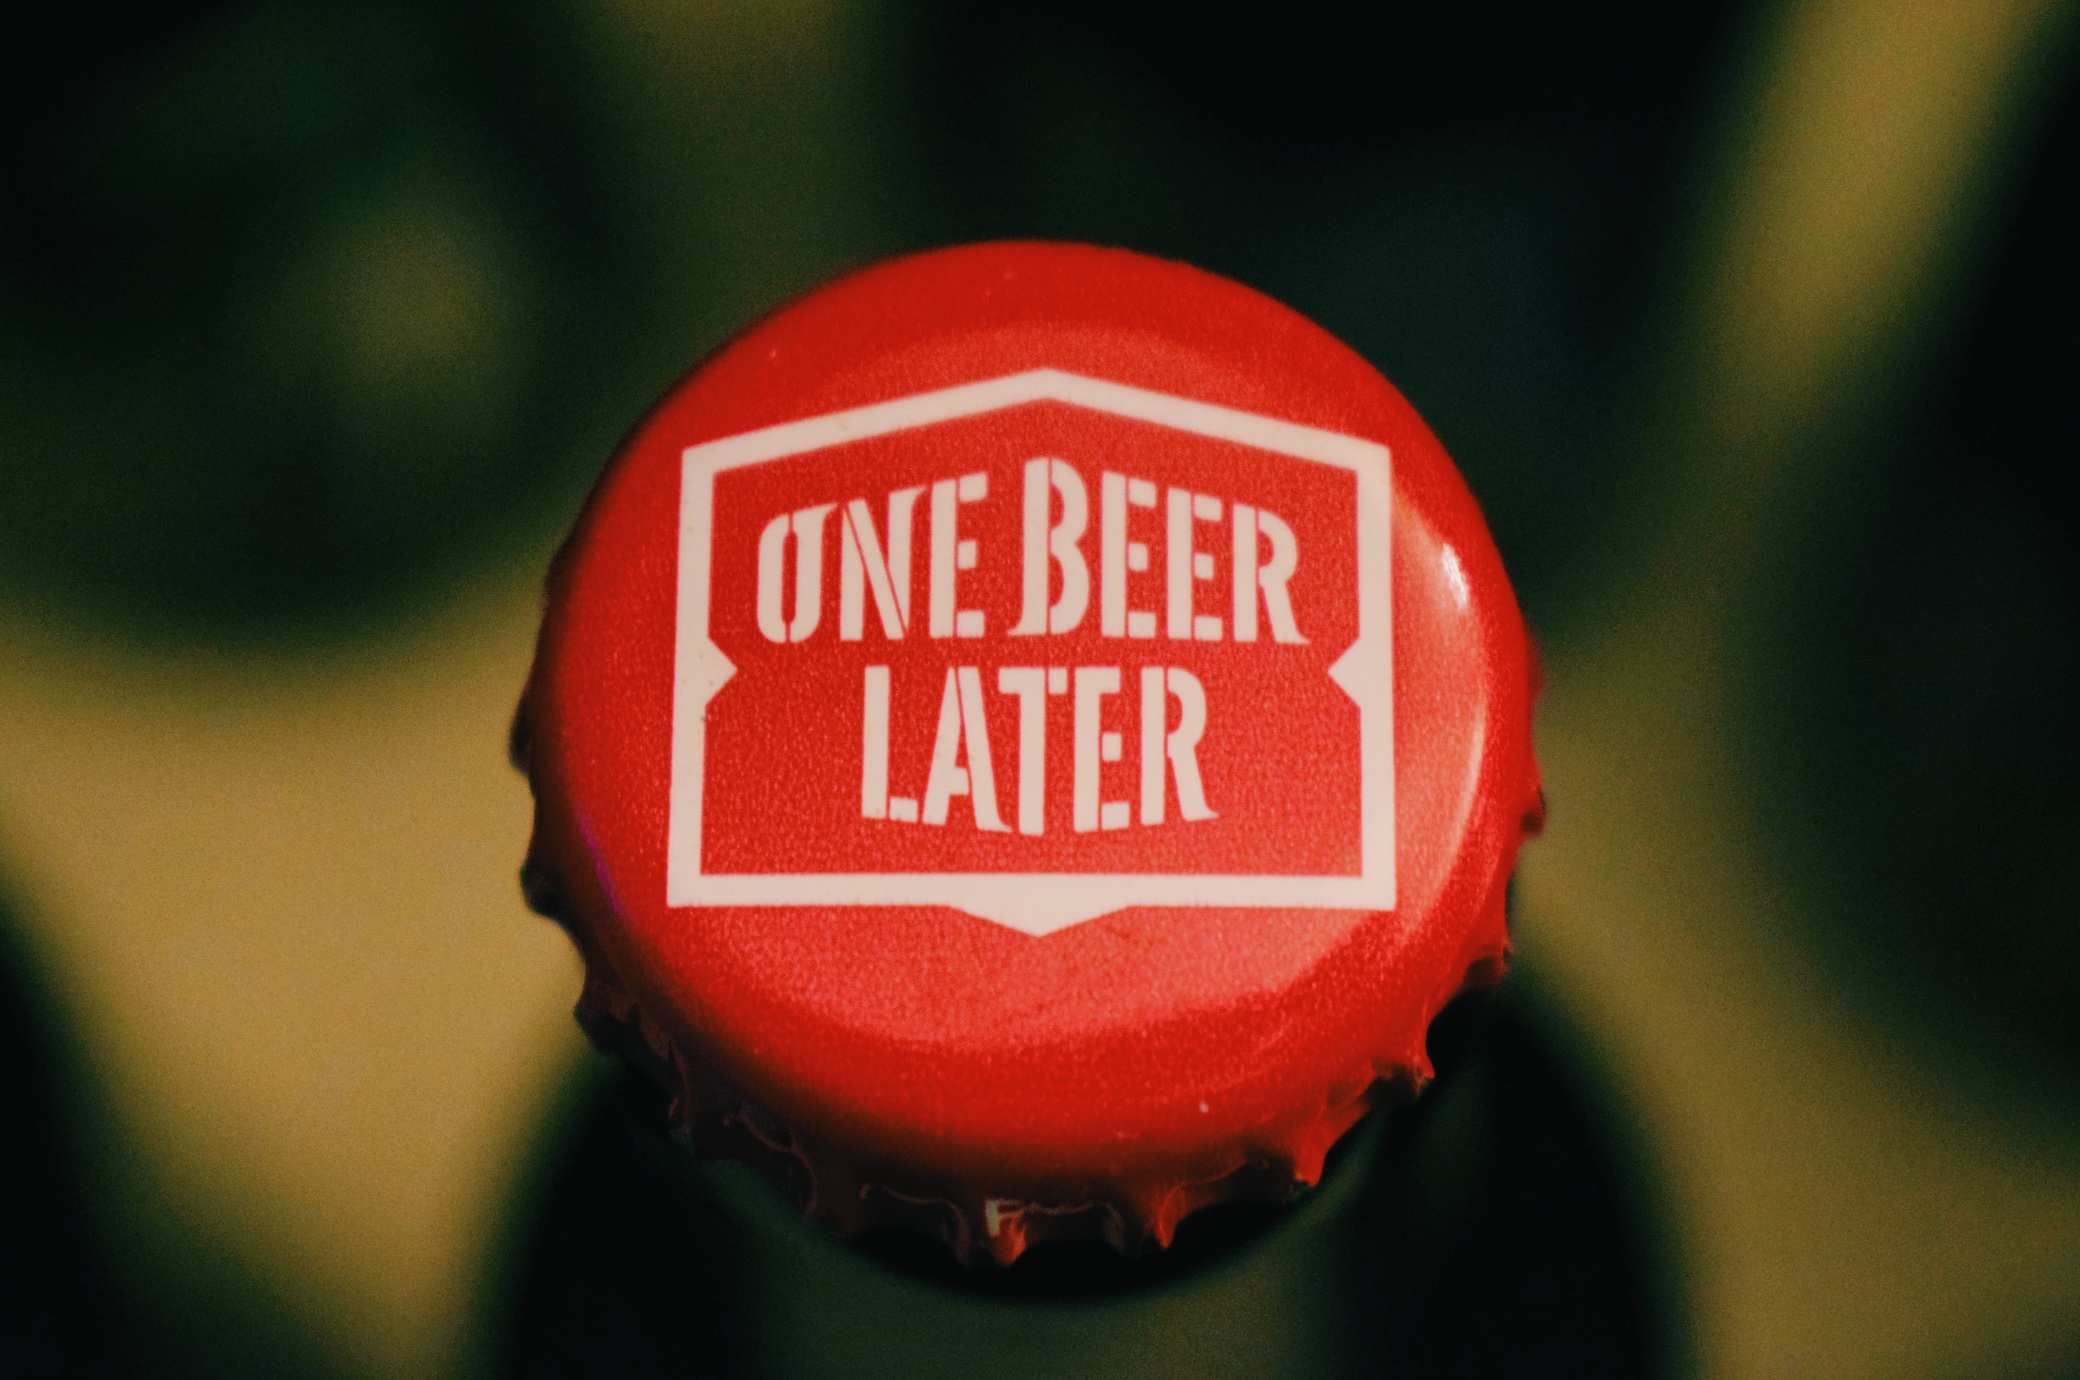 Upclose shot of beer bottle cap that says, One beer later; image by Stefan Cosma, via Unsplash.com.